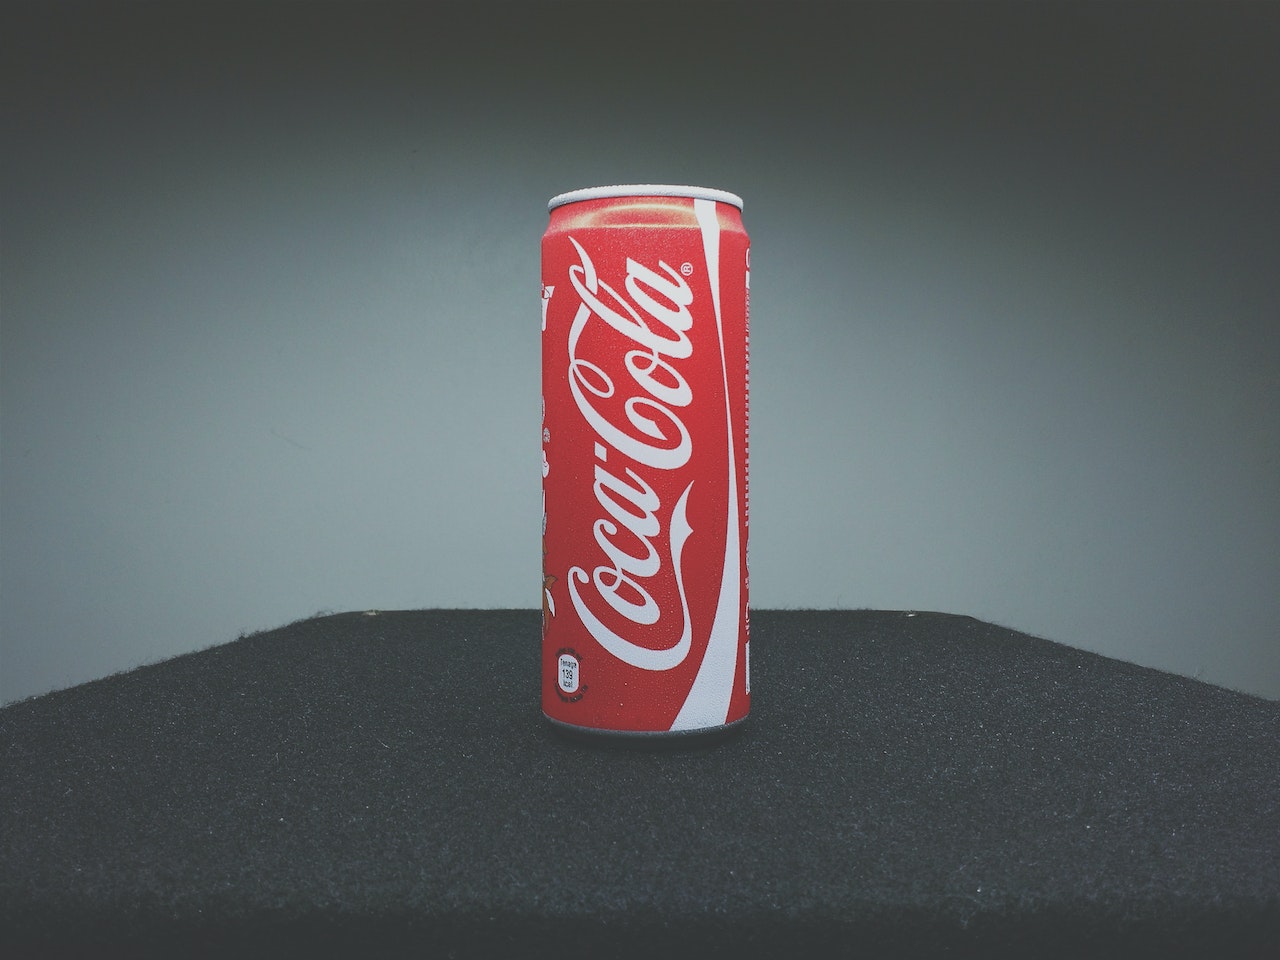 A can of coke